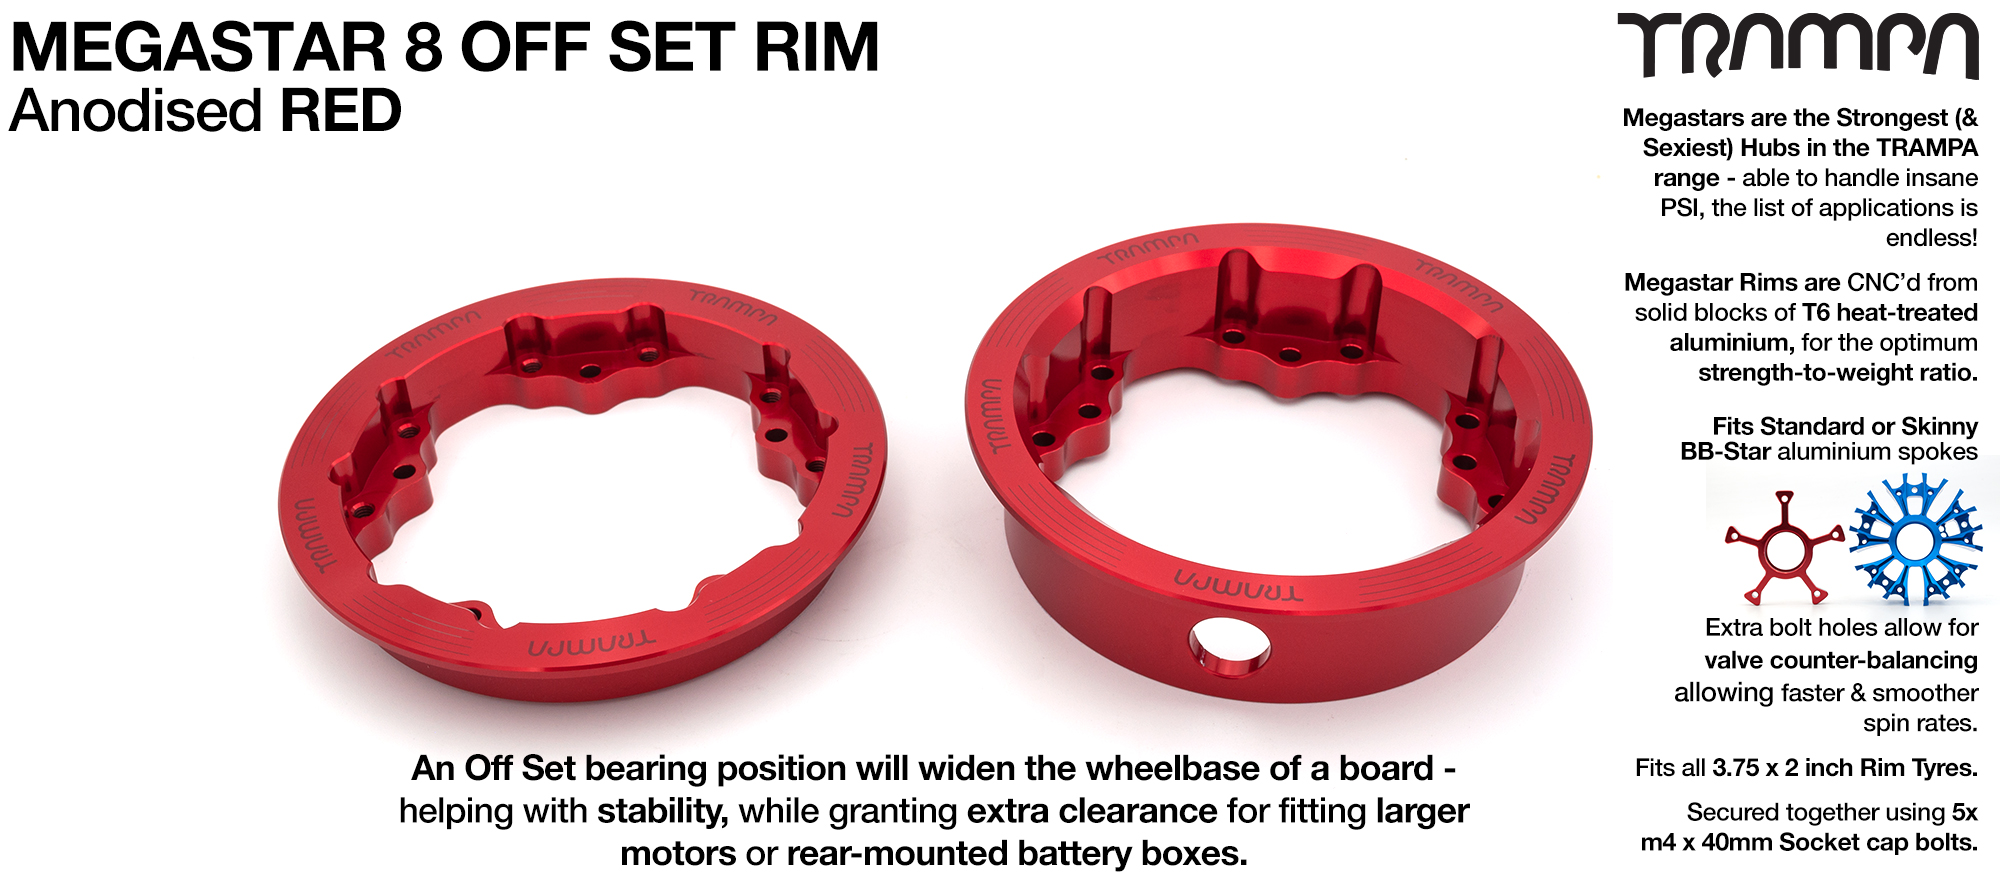 MEGASTAR 8 OS Rims Measure 3.75 x 2 Inch. The bearings are positioned OFF-SET widening the wheel base & accept all 3.75 Rim Tyres - RED